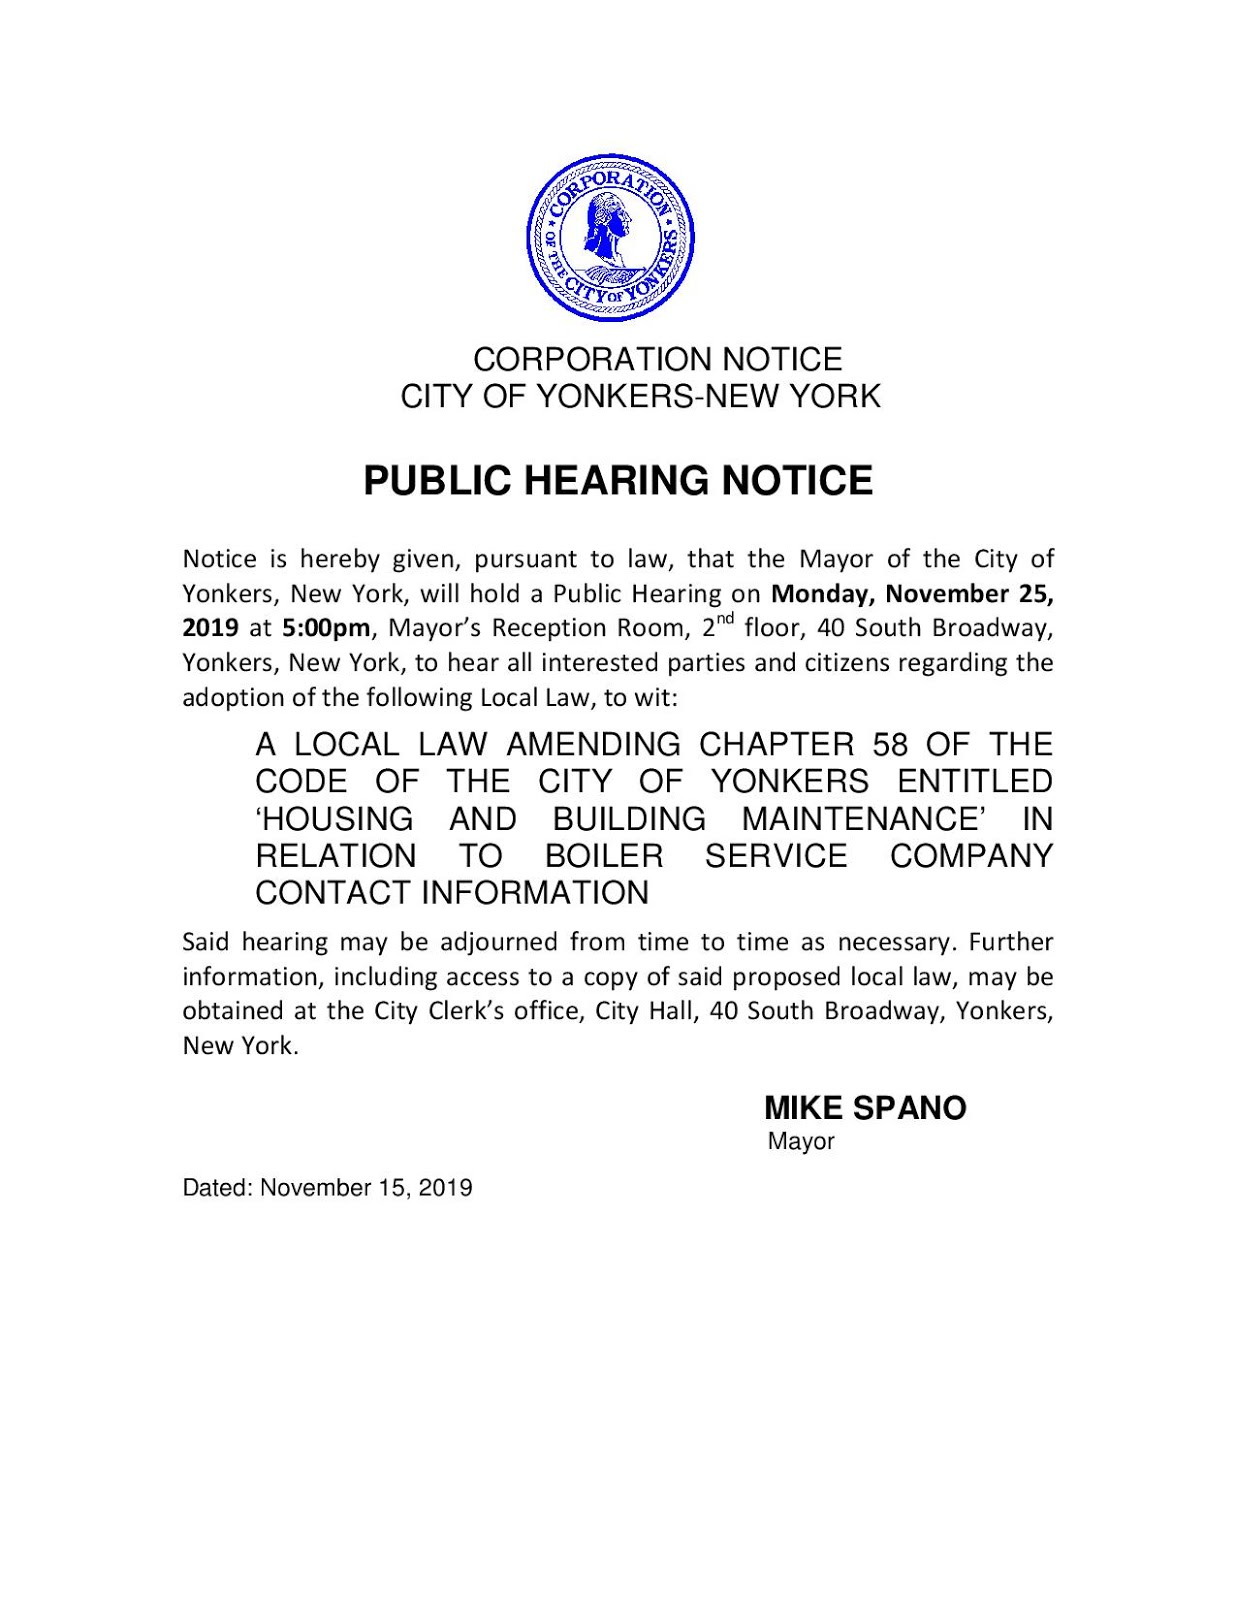 City of Yonkers: Public Hearing Notice.